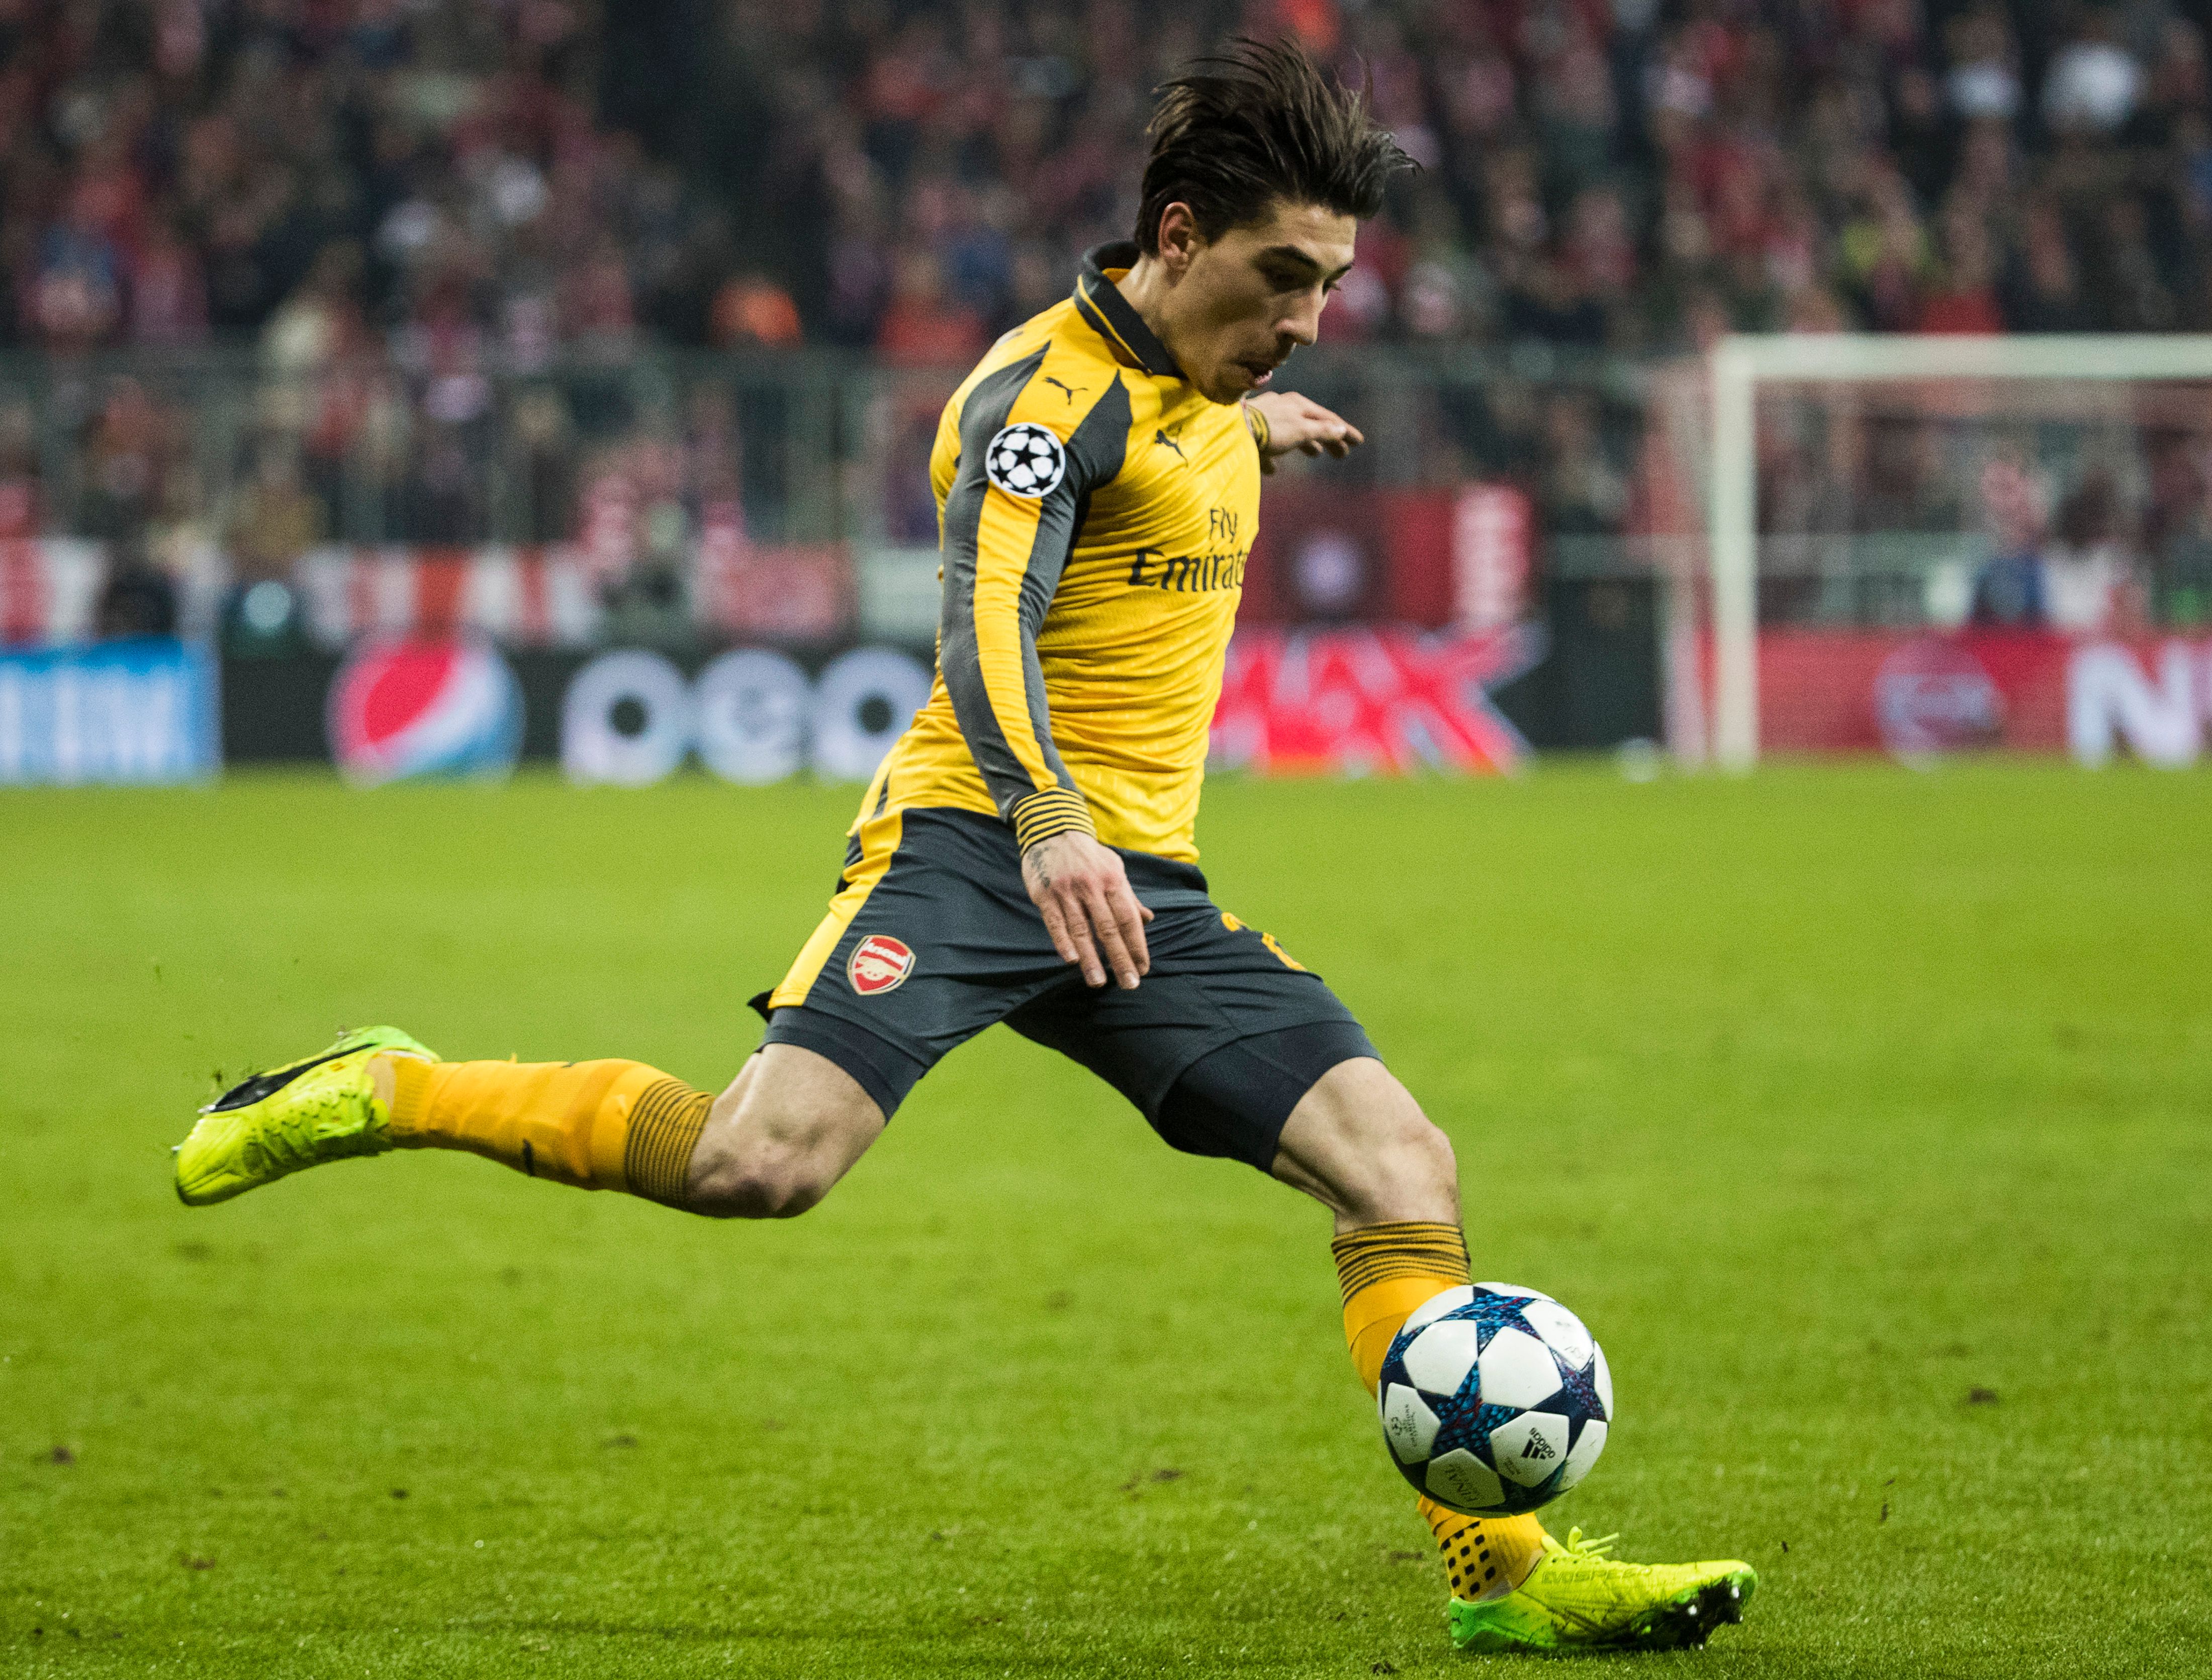 Arsenal's Spanish right back Hector Bellerin plays a cross during the UEFA Champions League round of sixteen football match between FC Bayern Munich and Arsenal in Munich, southern Germany, on February 15, 2017.  / AFP / Odd ANDERSEN        (Photo credit should read ODD ANDERSEN/AFP/Getty Images)